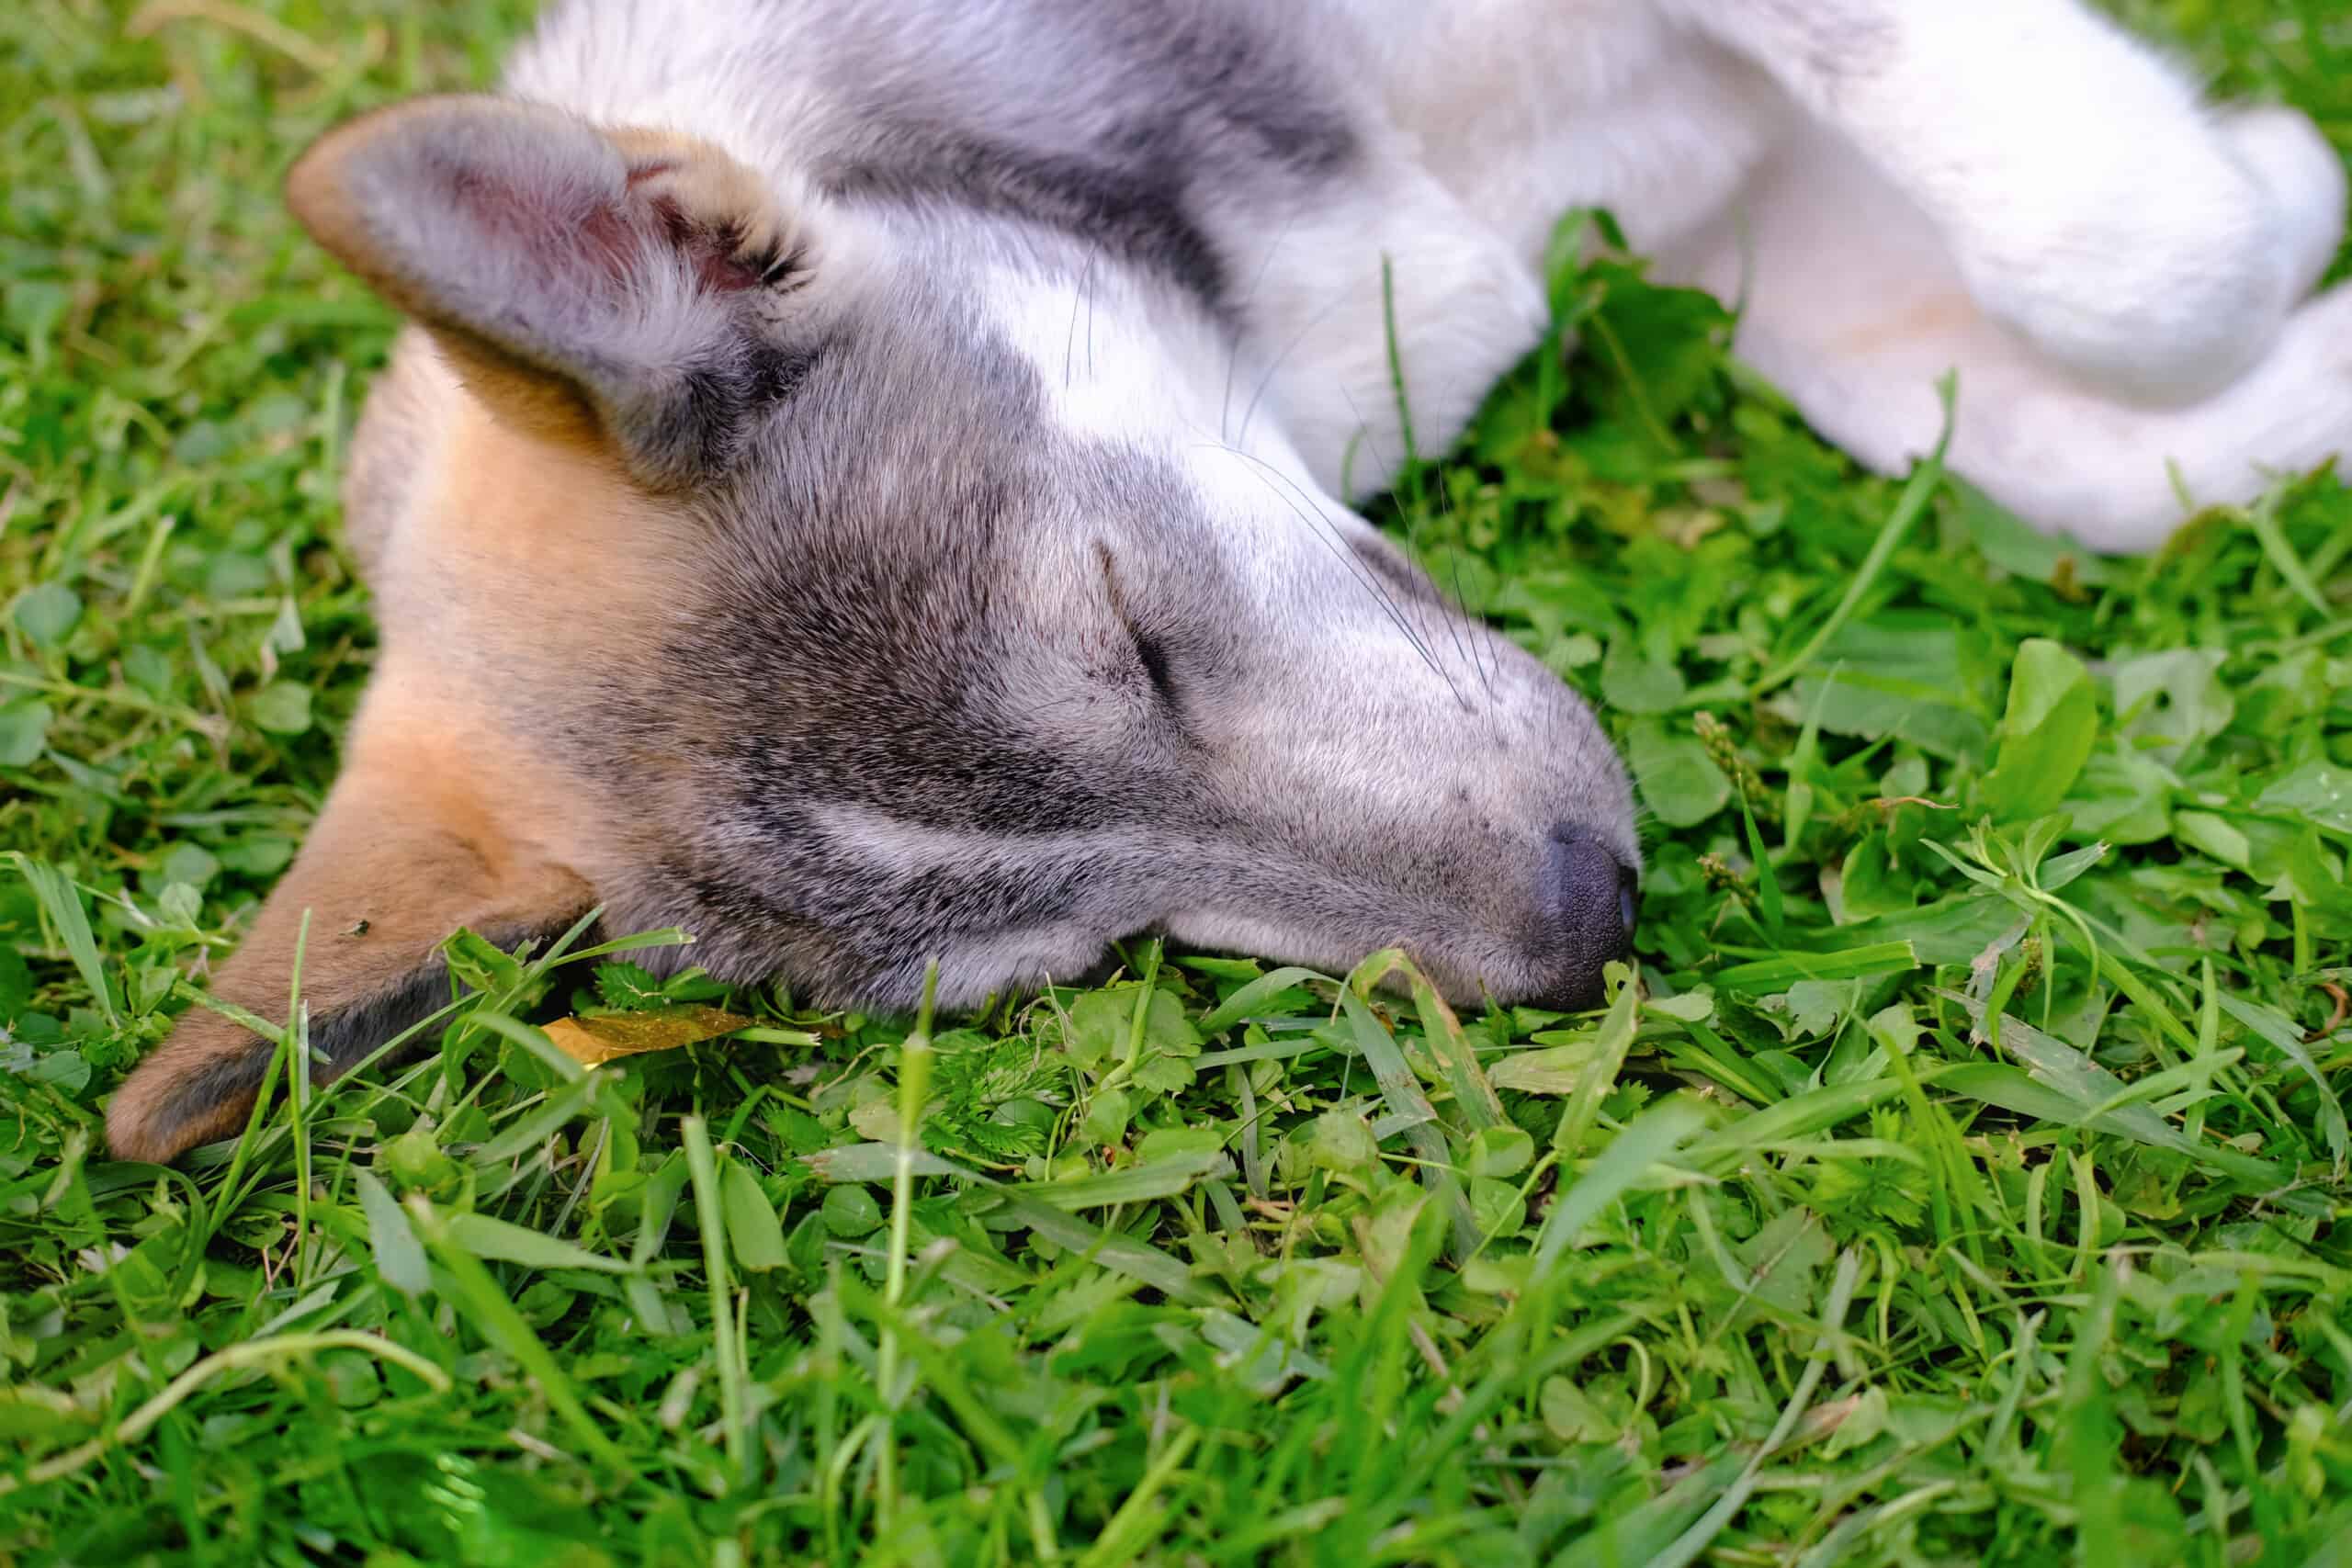 What vitamins do dogs get from eating grass?